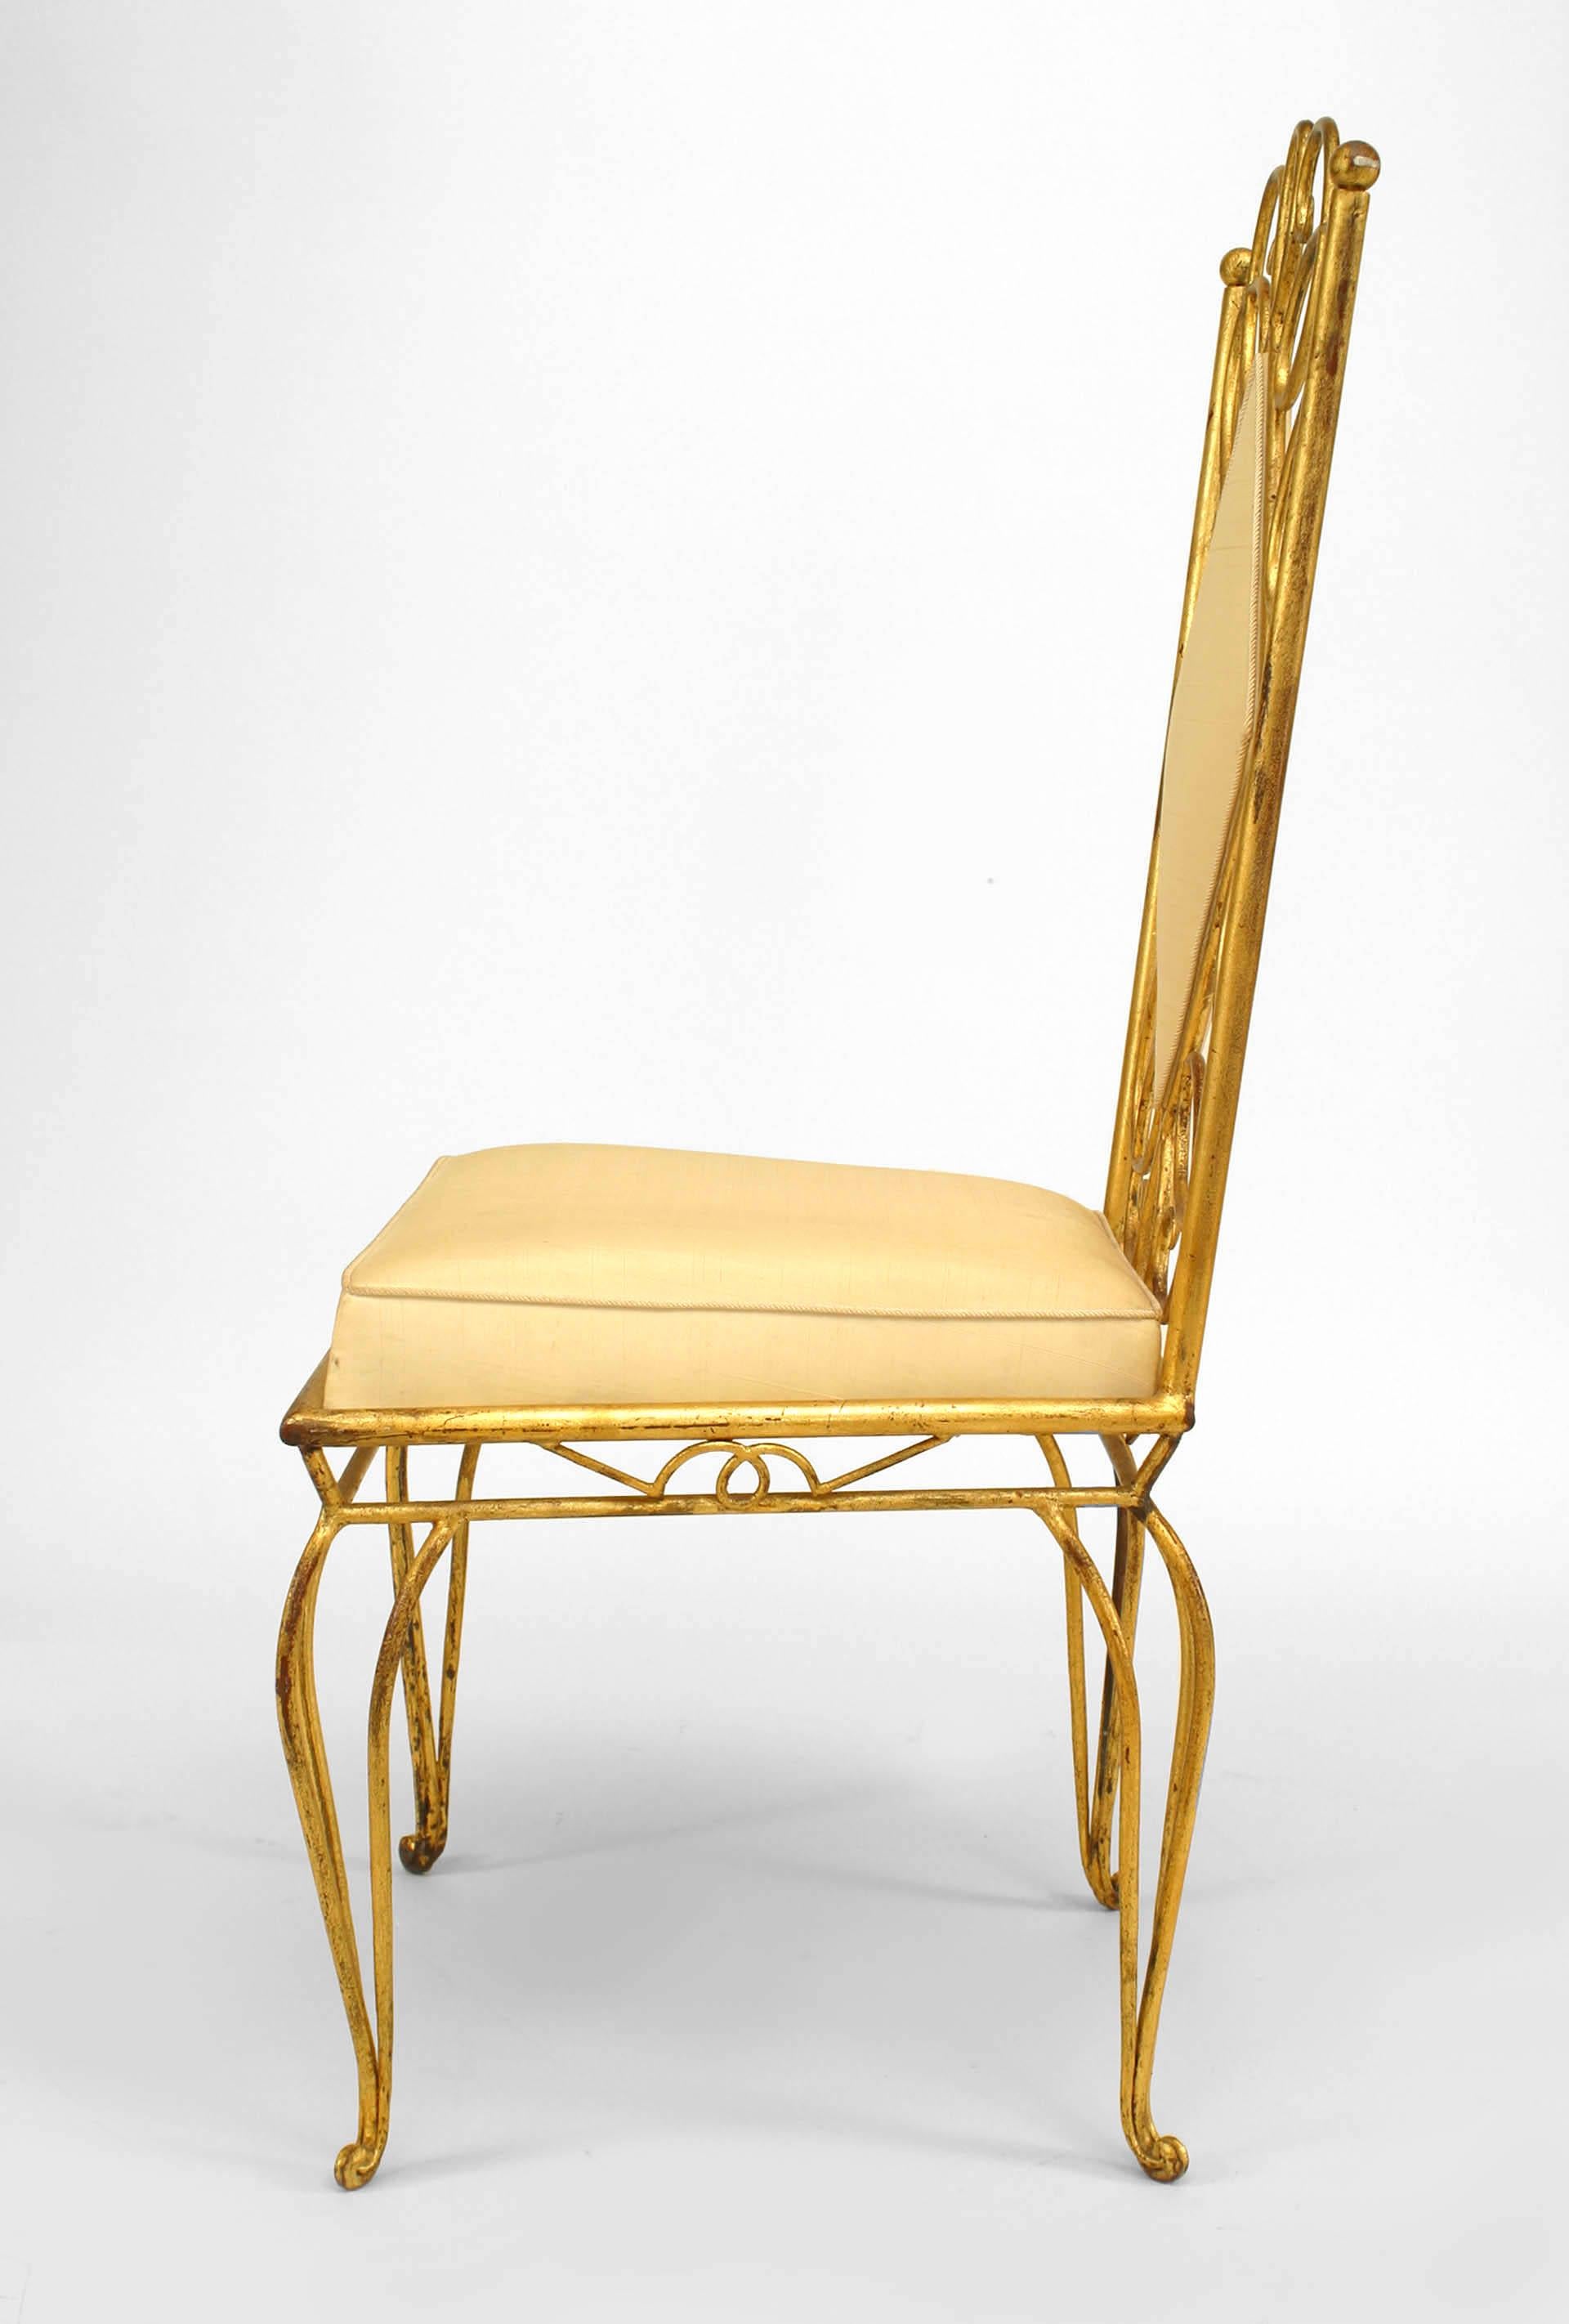 Mid-20th Century Pair of French Gilt Metal Scroll Side Chairs For Sale